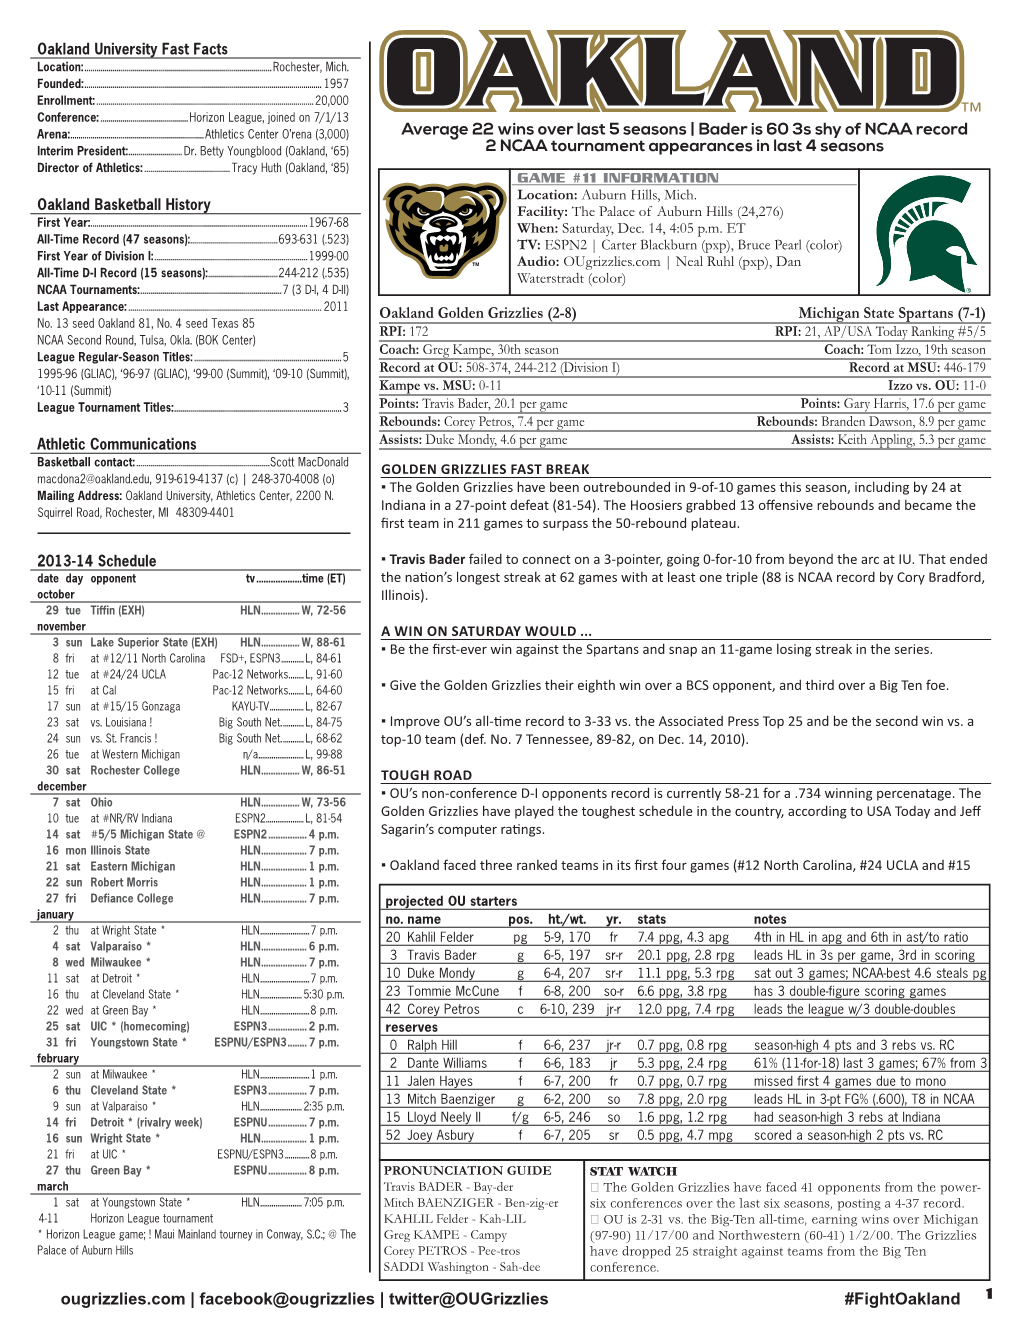 Twitter@Ougrizzlies #Fightoakland 1 Oakland University Fast Facts